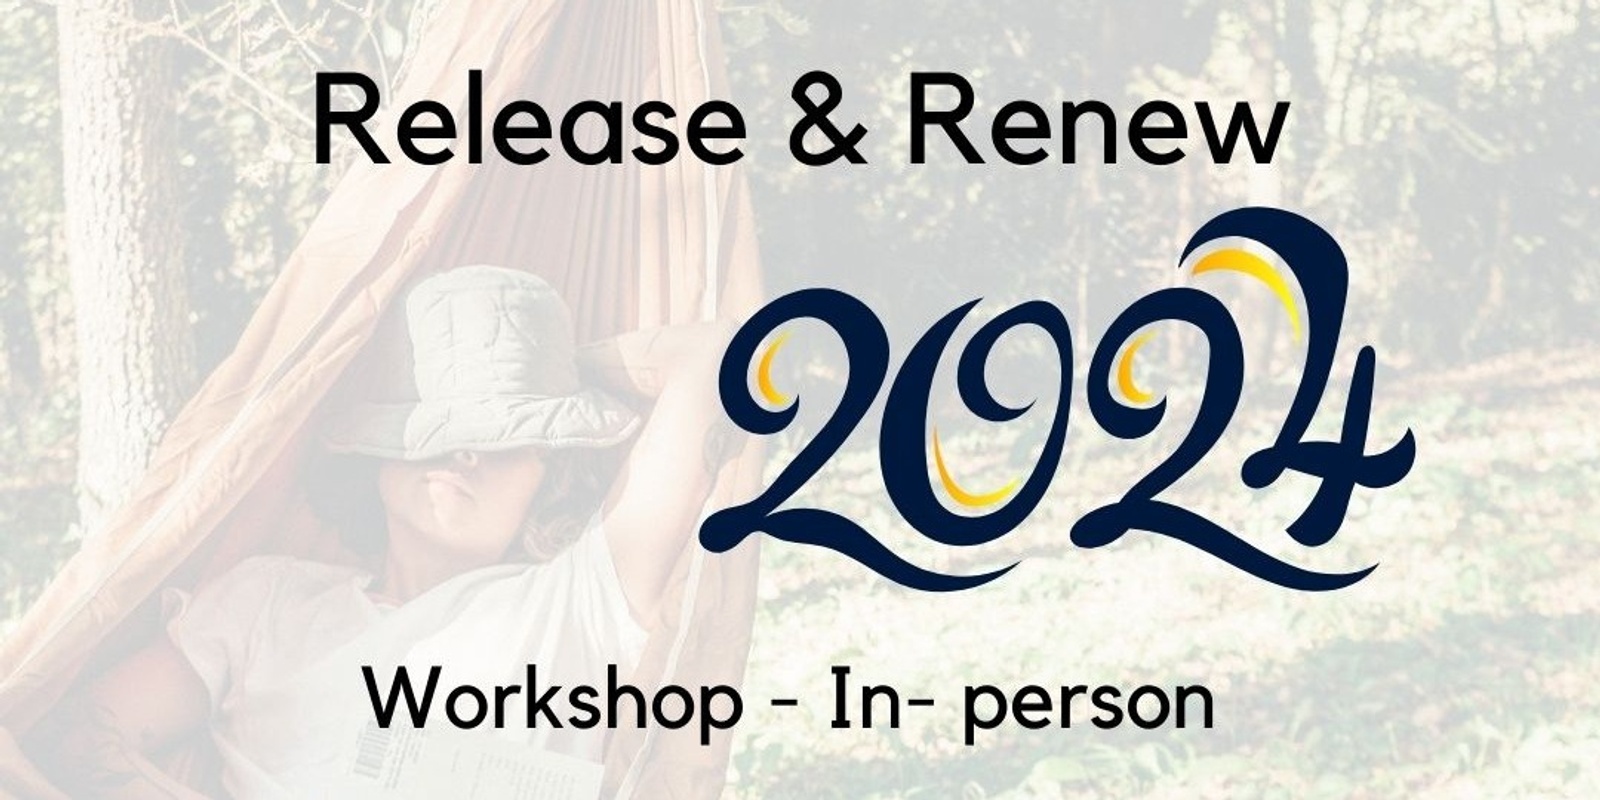 Banner image for Release & Renew for 2024